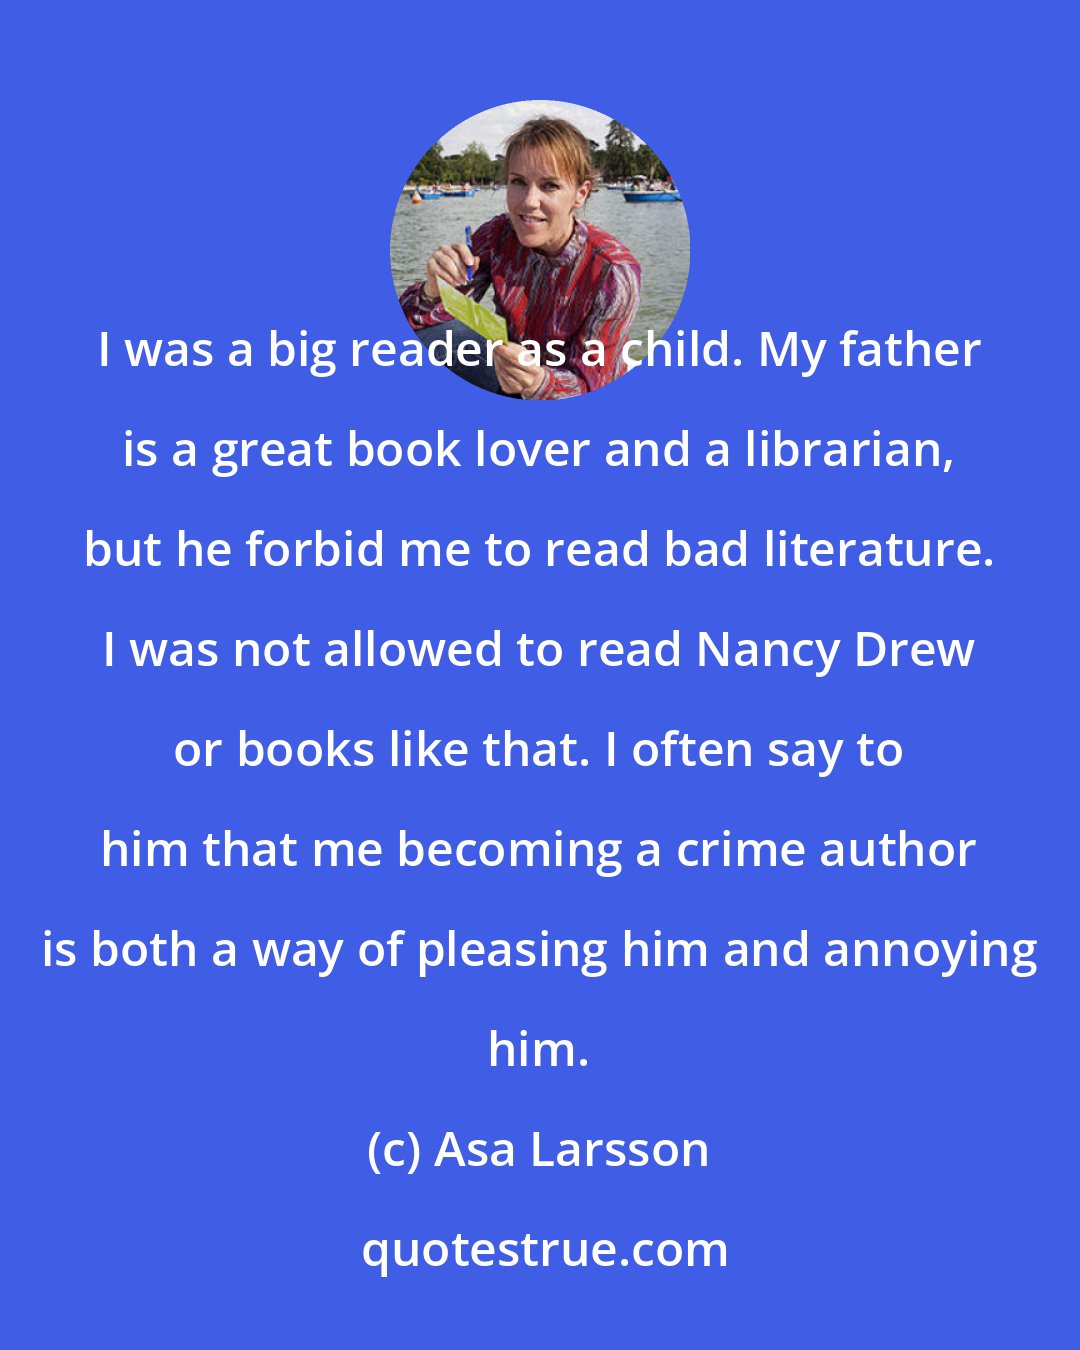 Asa Larsson: I was a big reader as a child. My father is a great book lover and a librarian, but he forbid me to read bad literature. I was not allowed to read Nancy Drew or books like that. I often say to him that me becoming a crime author is both a way of pleasing him and annoying him.